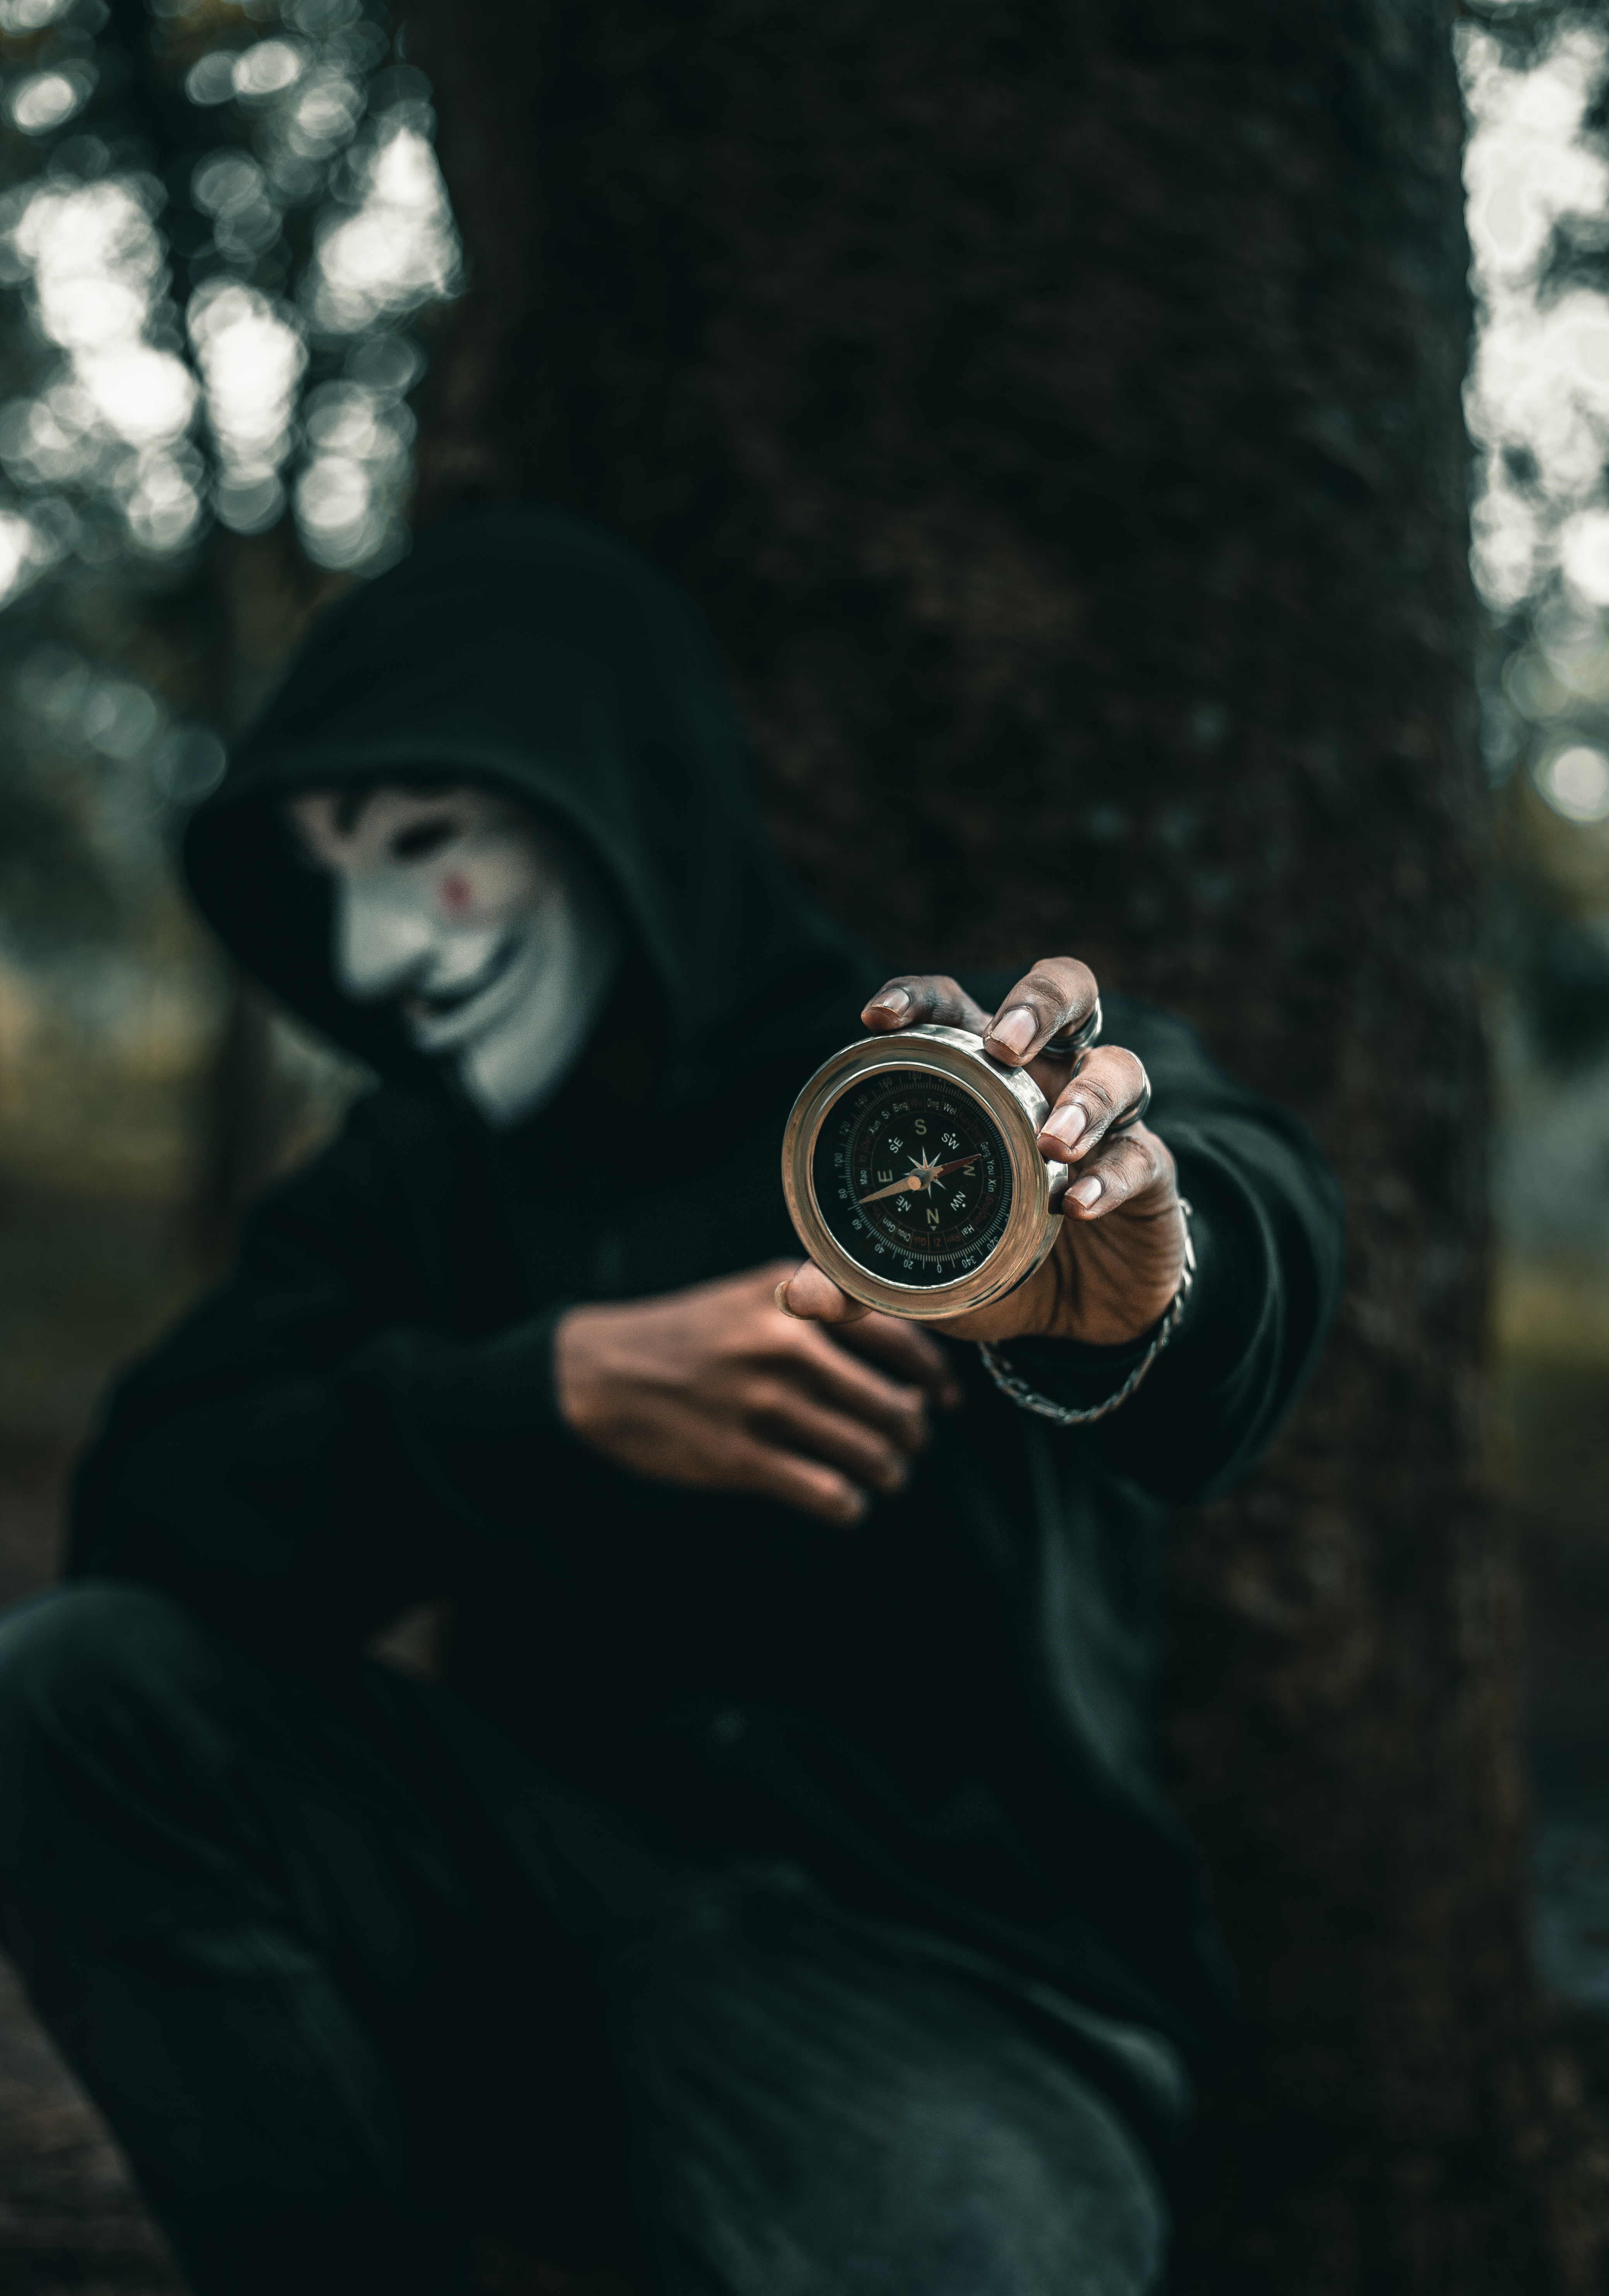 1920x1080 Background anonymous, miscellanea, miscellaneous, mask, human, person, hood, compass